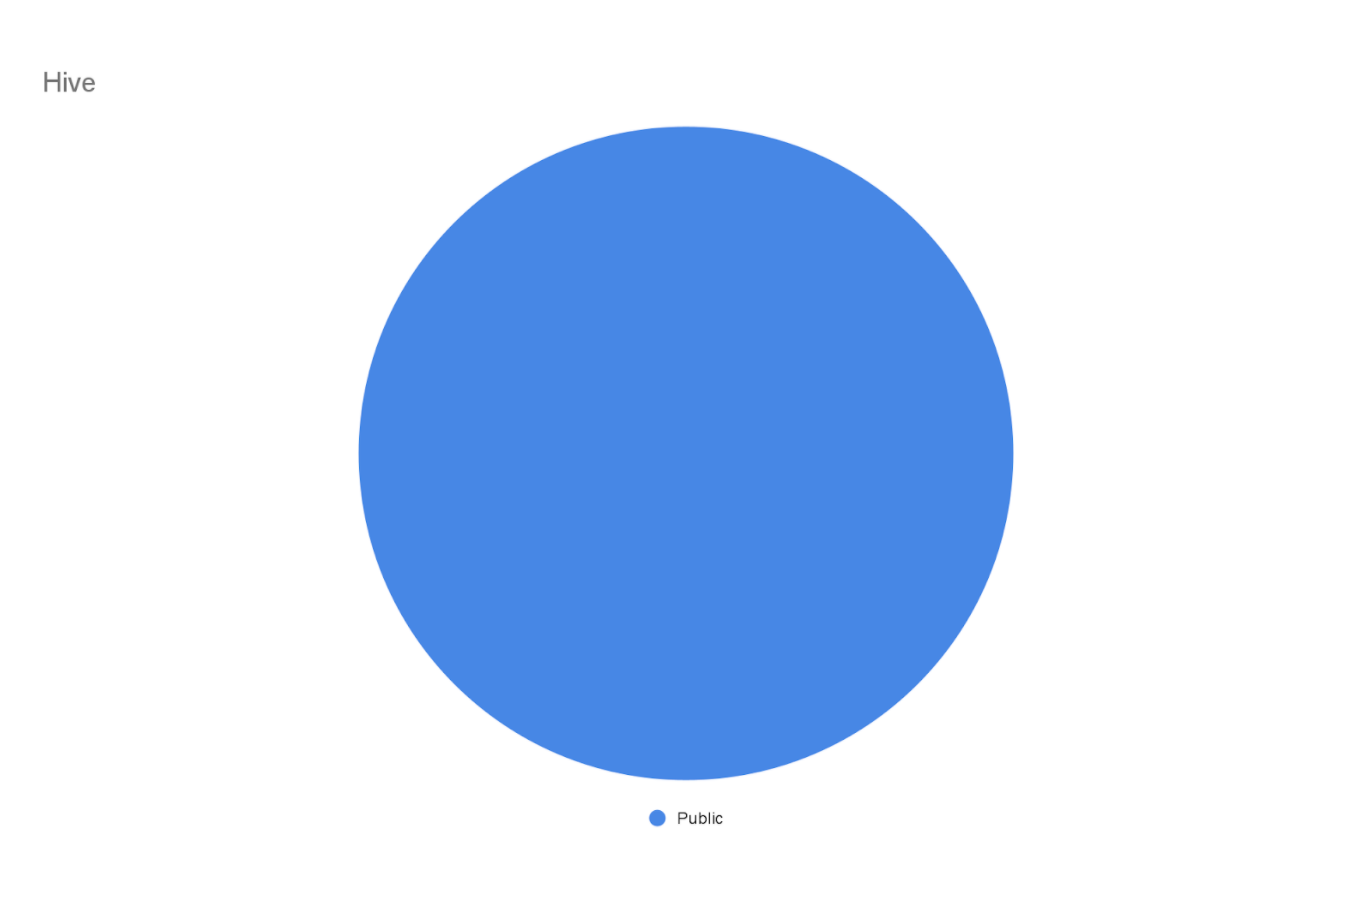 The Hive pie chart highlighting the fact there was no founding pre-mine or VC allocation.